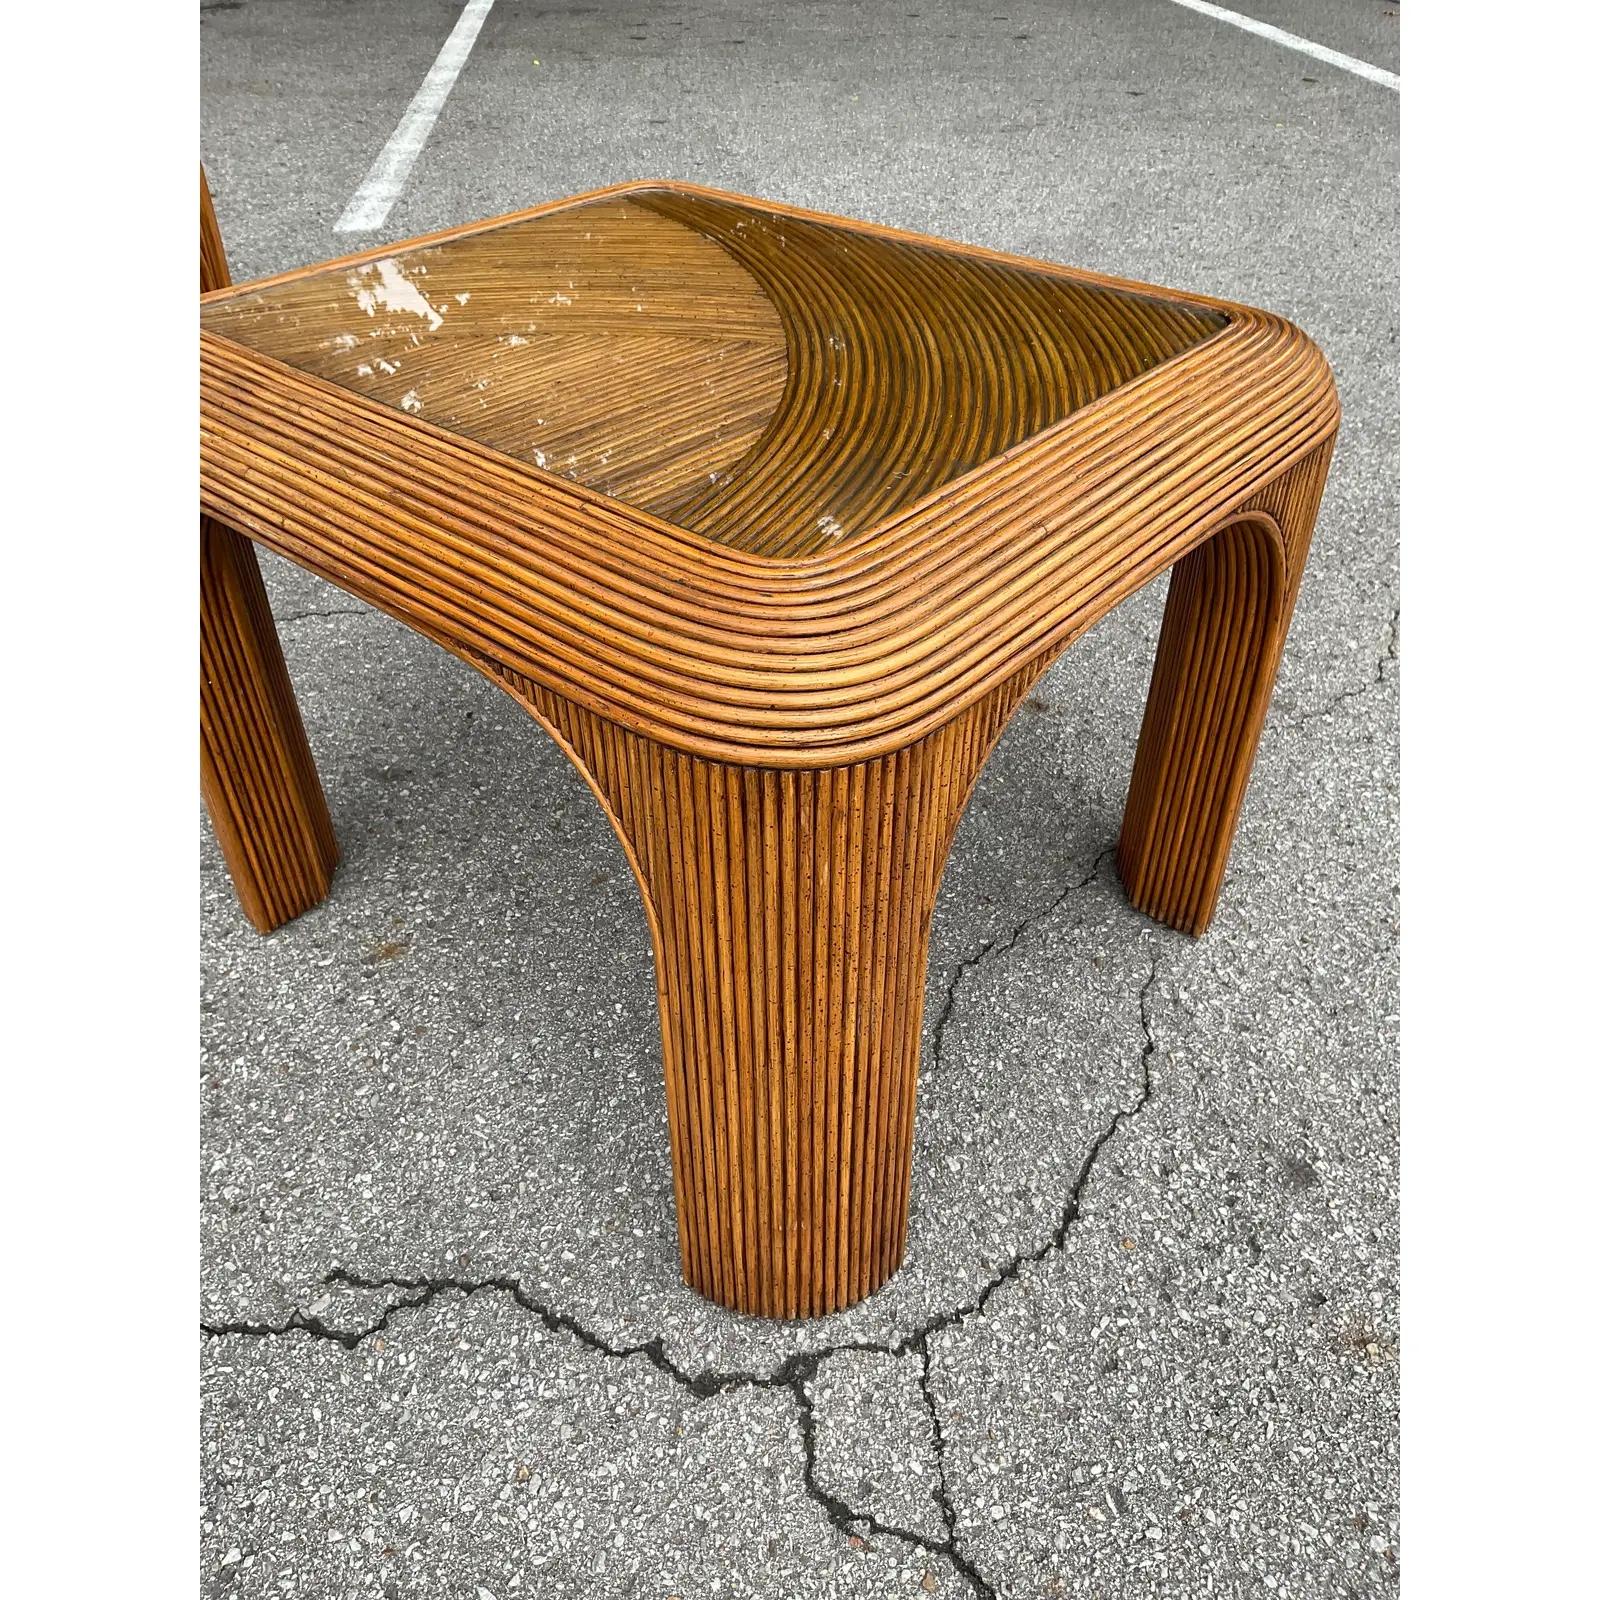 This beautiful pencil reed side table is stained a beautiful dark brown. The detailed pattern of the reeds on the top of the side table we’ve across one another topped with a glass top adds such beautiful to the piece. This would be gorgeous in a